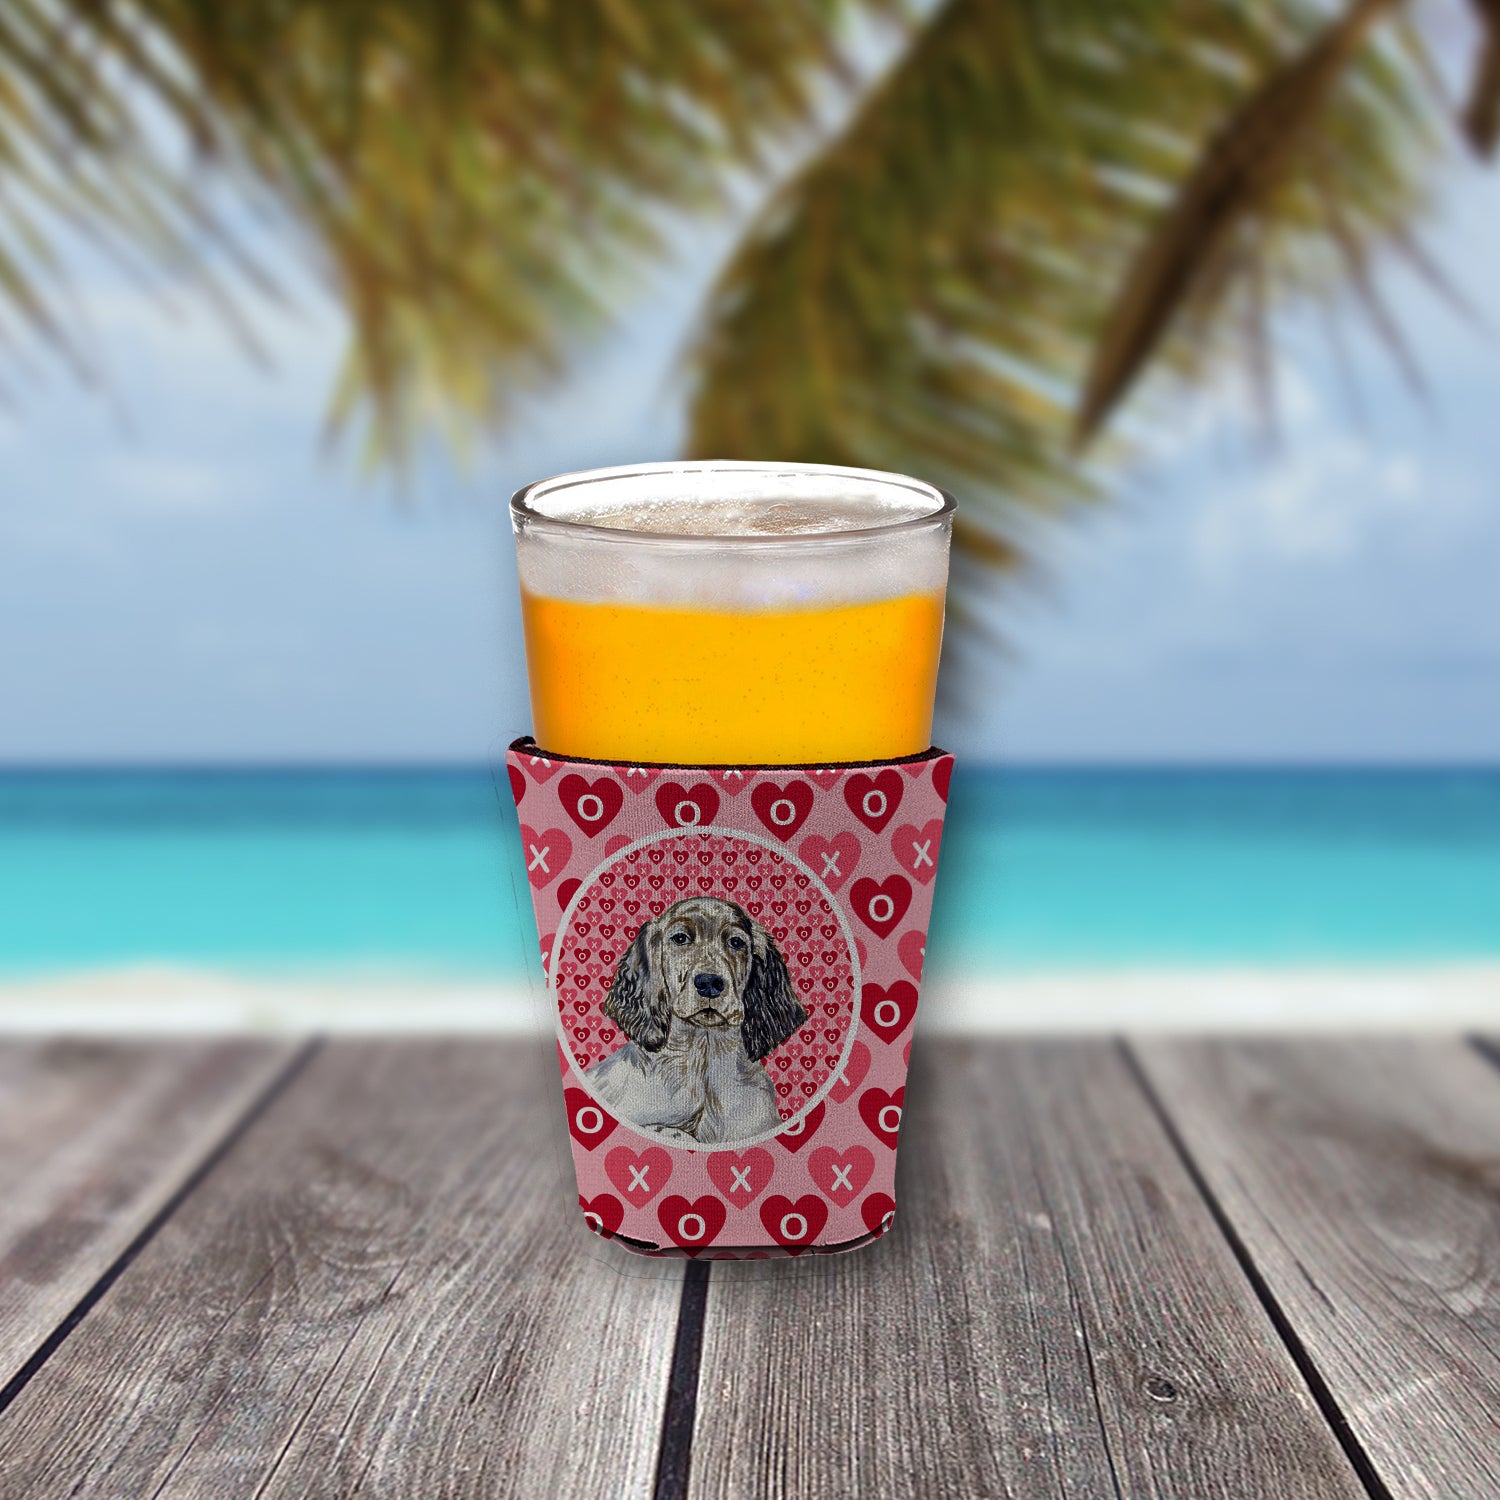 English Setter Valentine's Love and Hearts Red Cup Beverage Insulator Hugger